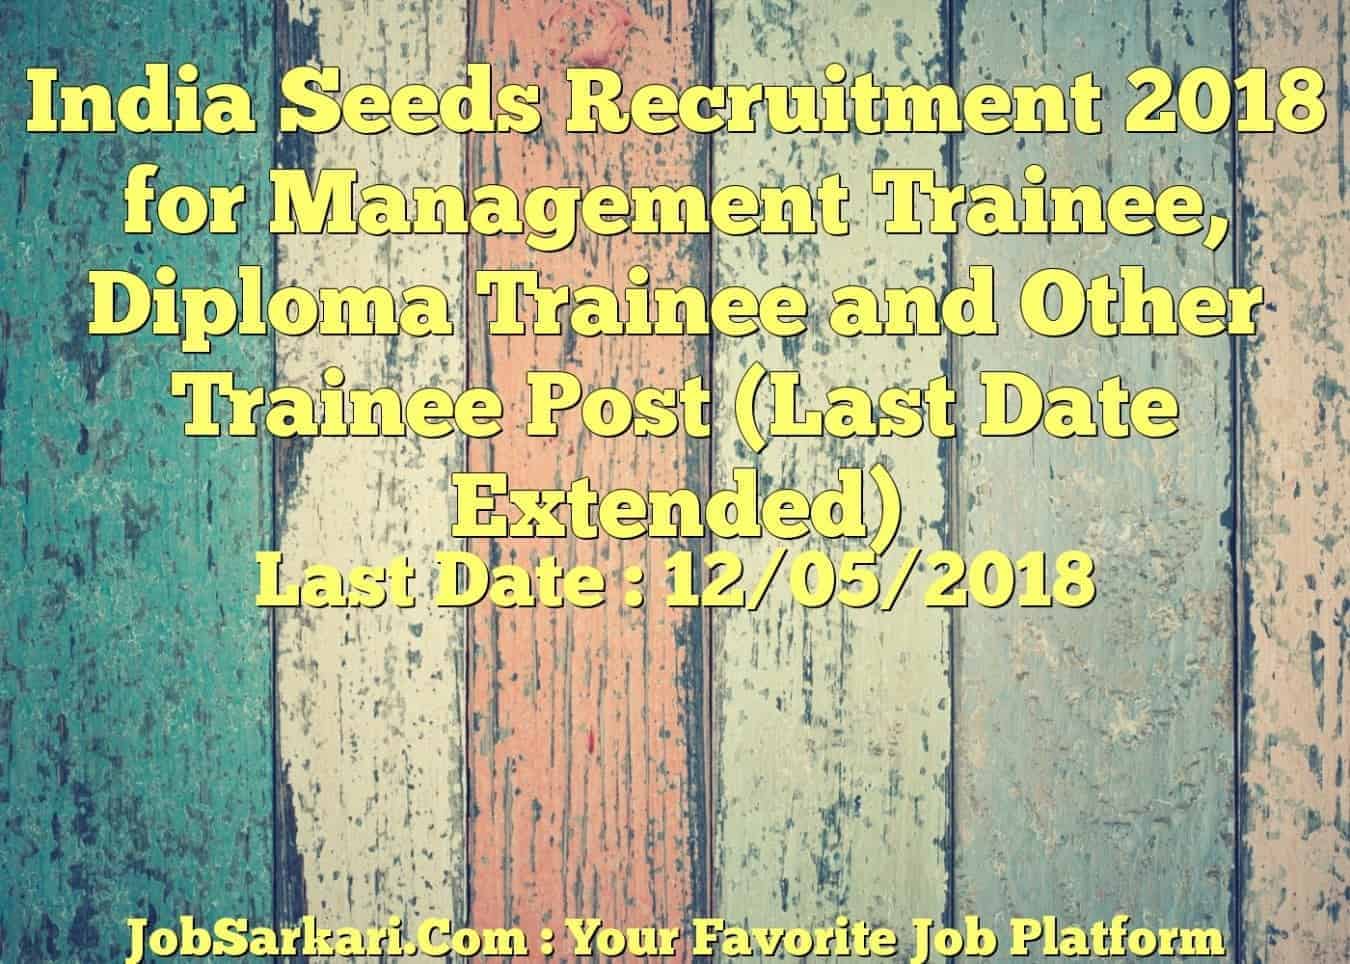 India Seeds Recruitment 2018 for Management Trainee, Diploma Trainee and Other Trainee Post (Last Date Extended)